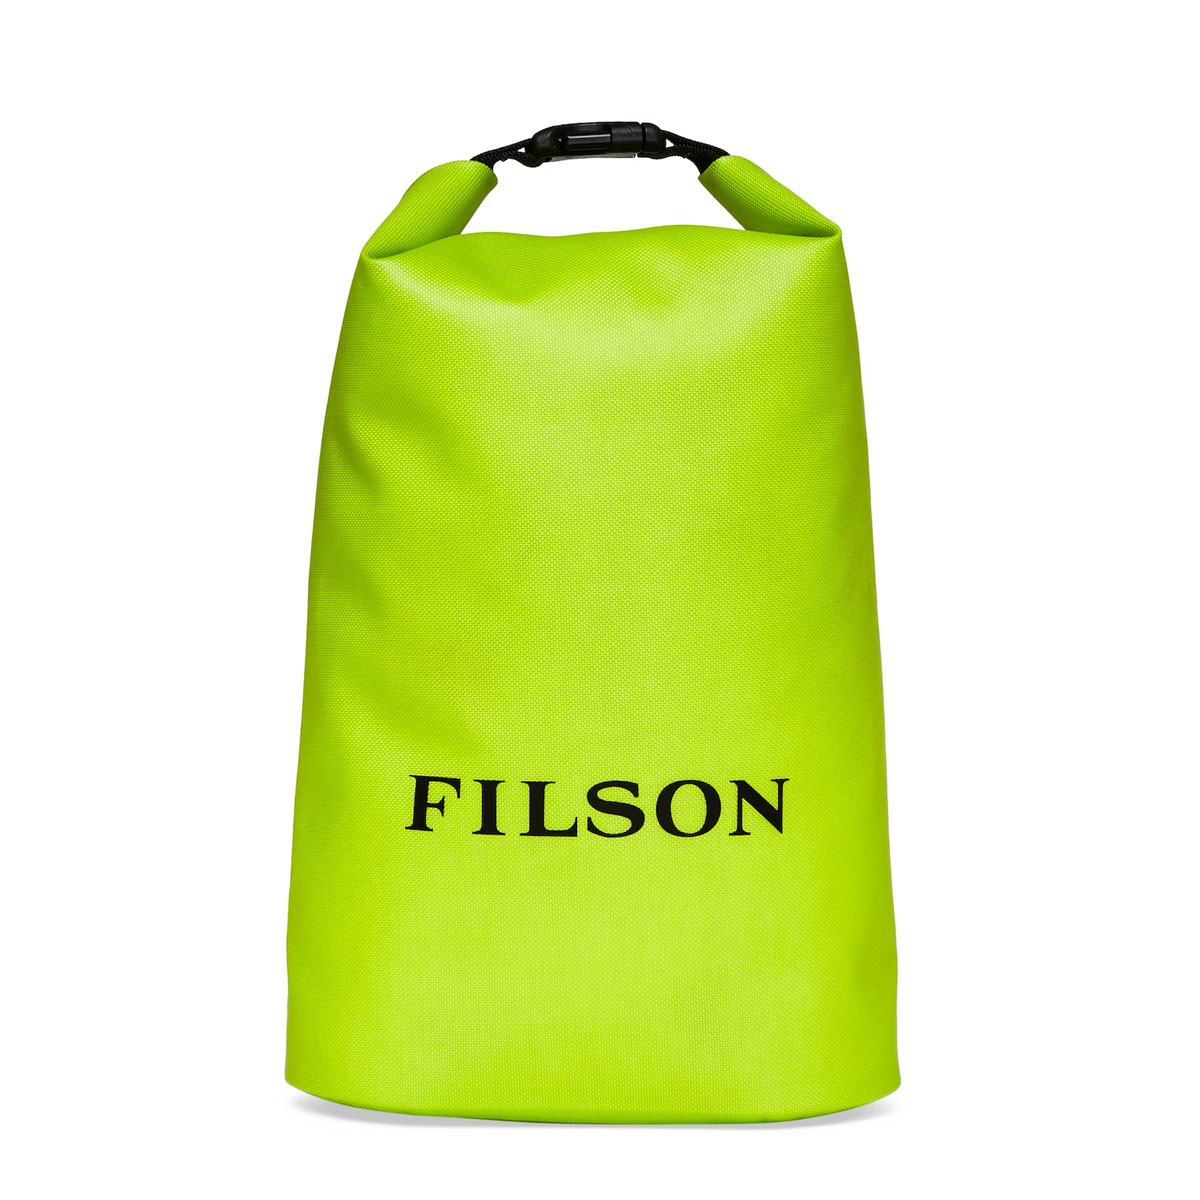 Filson Dry-Bag Small Laser Green, Water- and wear-resistant roll